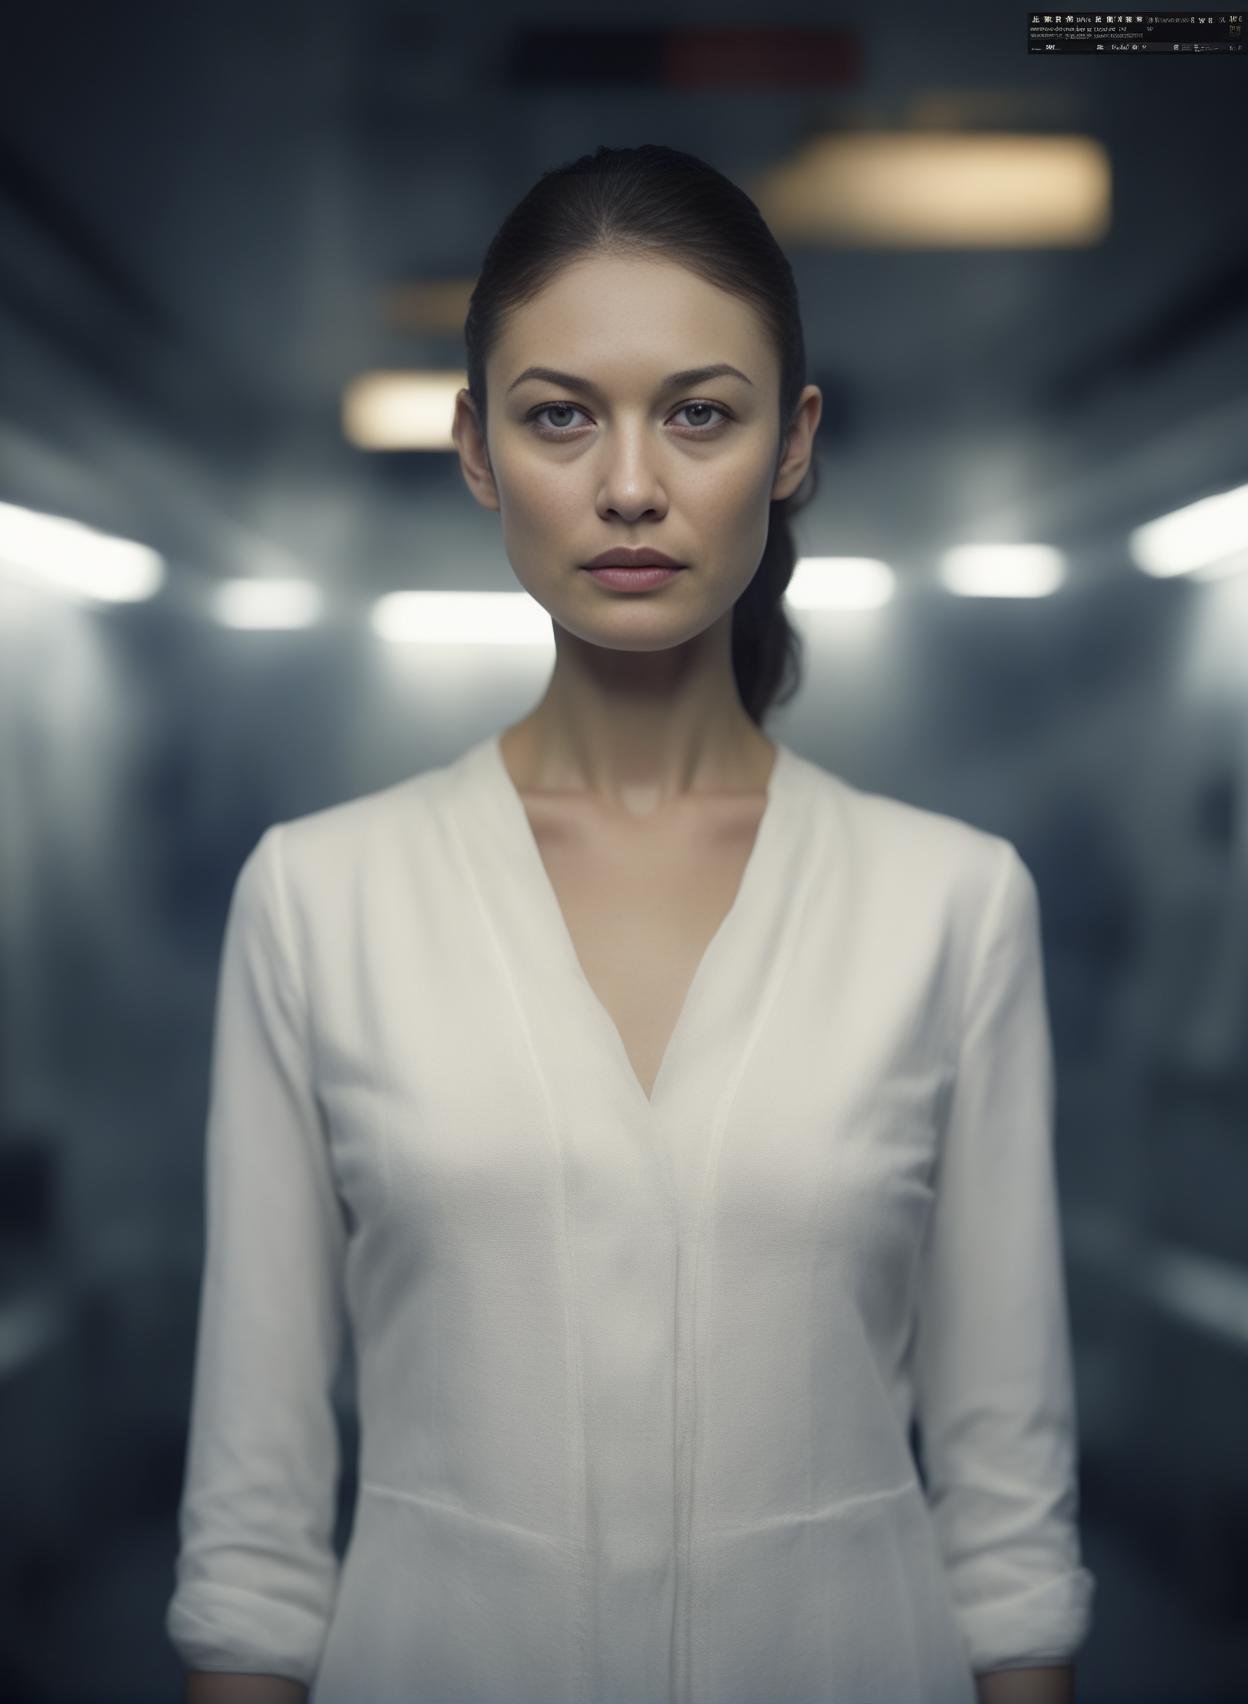 OlgaKostyantynivnaKurylenko,<lora:OlgaKostyantynivnaKurylenkoSDXL:1>female, realistic photo, bokeh lighting. Shigenori soejima_photo!! The girl who is a mix of katie holmes and Katsuhiro Otomo!!! in an empty dark deep space station room with many lighted windows at night; hard shadows all over the place!, cinematic shot by Annie Leibovitz dramatic movie still- h 640 w 1920"H 800 N 9R - i 8 " t 35 mm f/2 4 nd 6 sony alpha ek very detailed perfect symmetry face expressionism masterpiece fine facial features gaze extremely coherent symmetrical accurate skin hand resolution photorealistic eyes trending on Dev